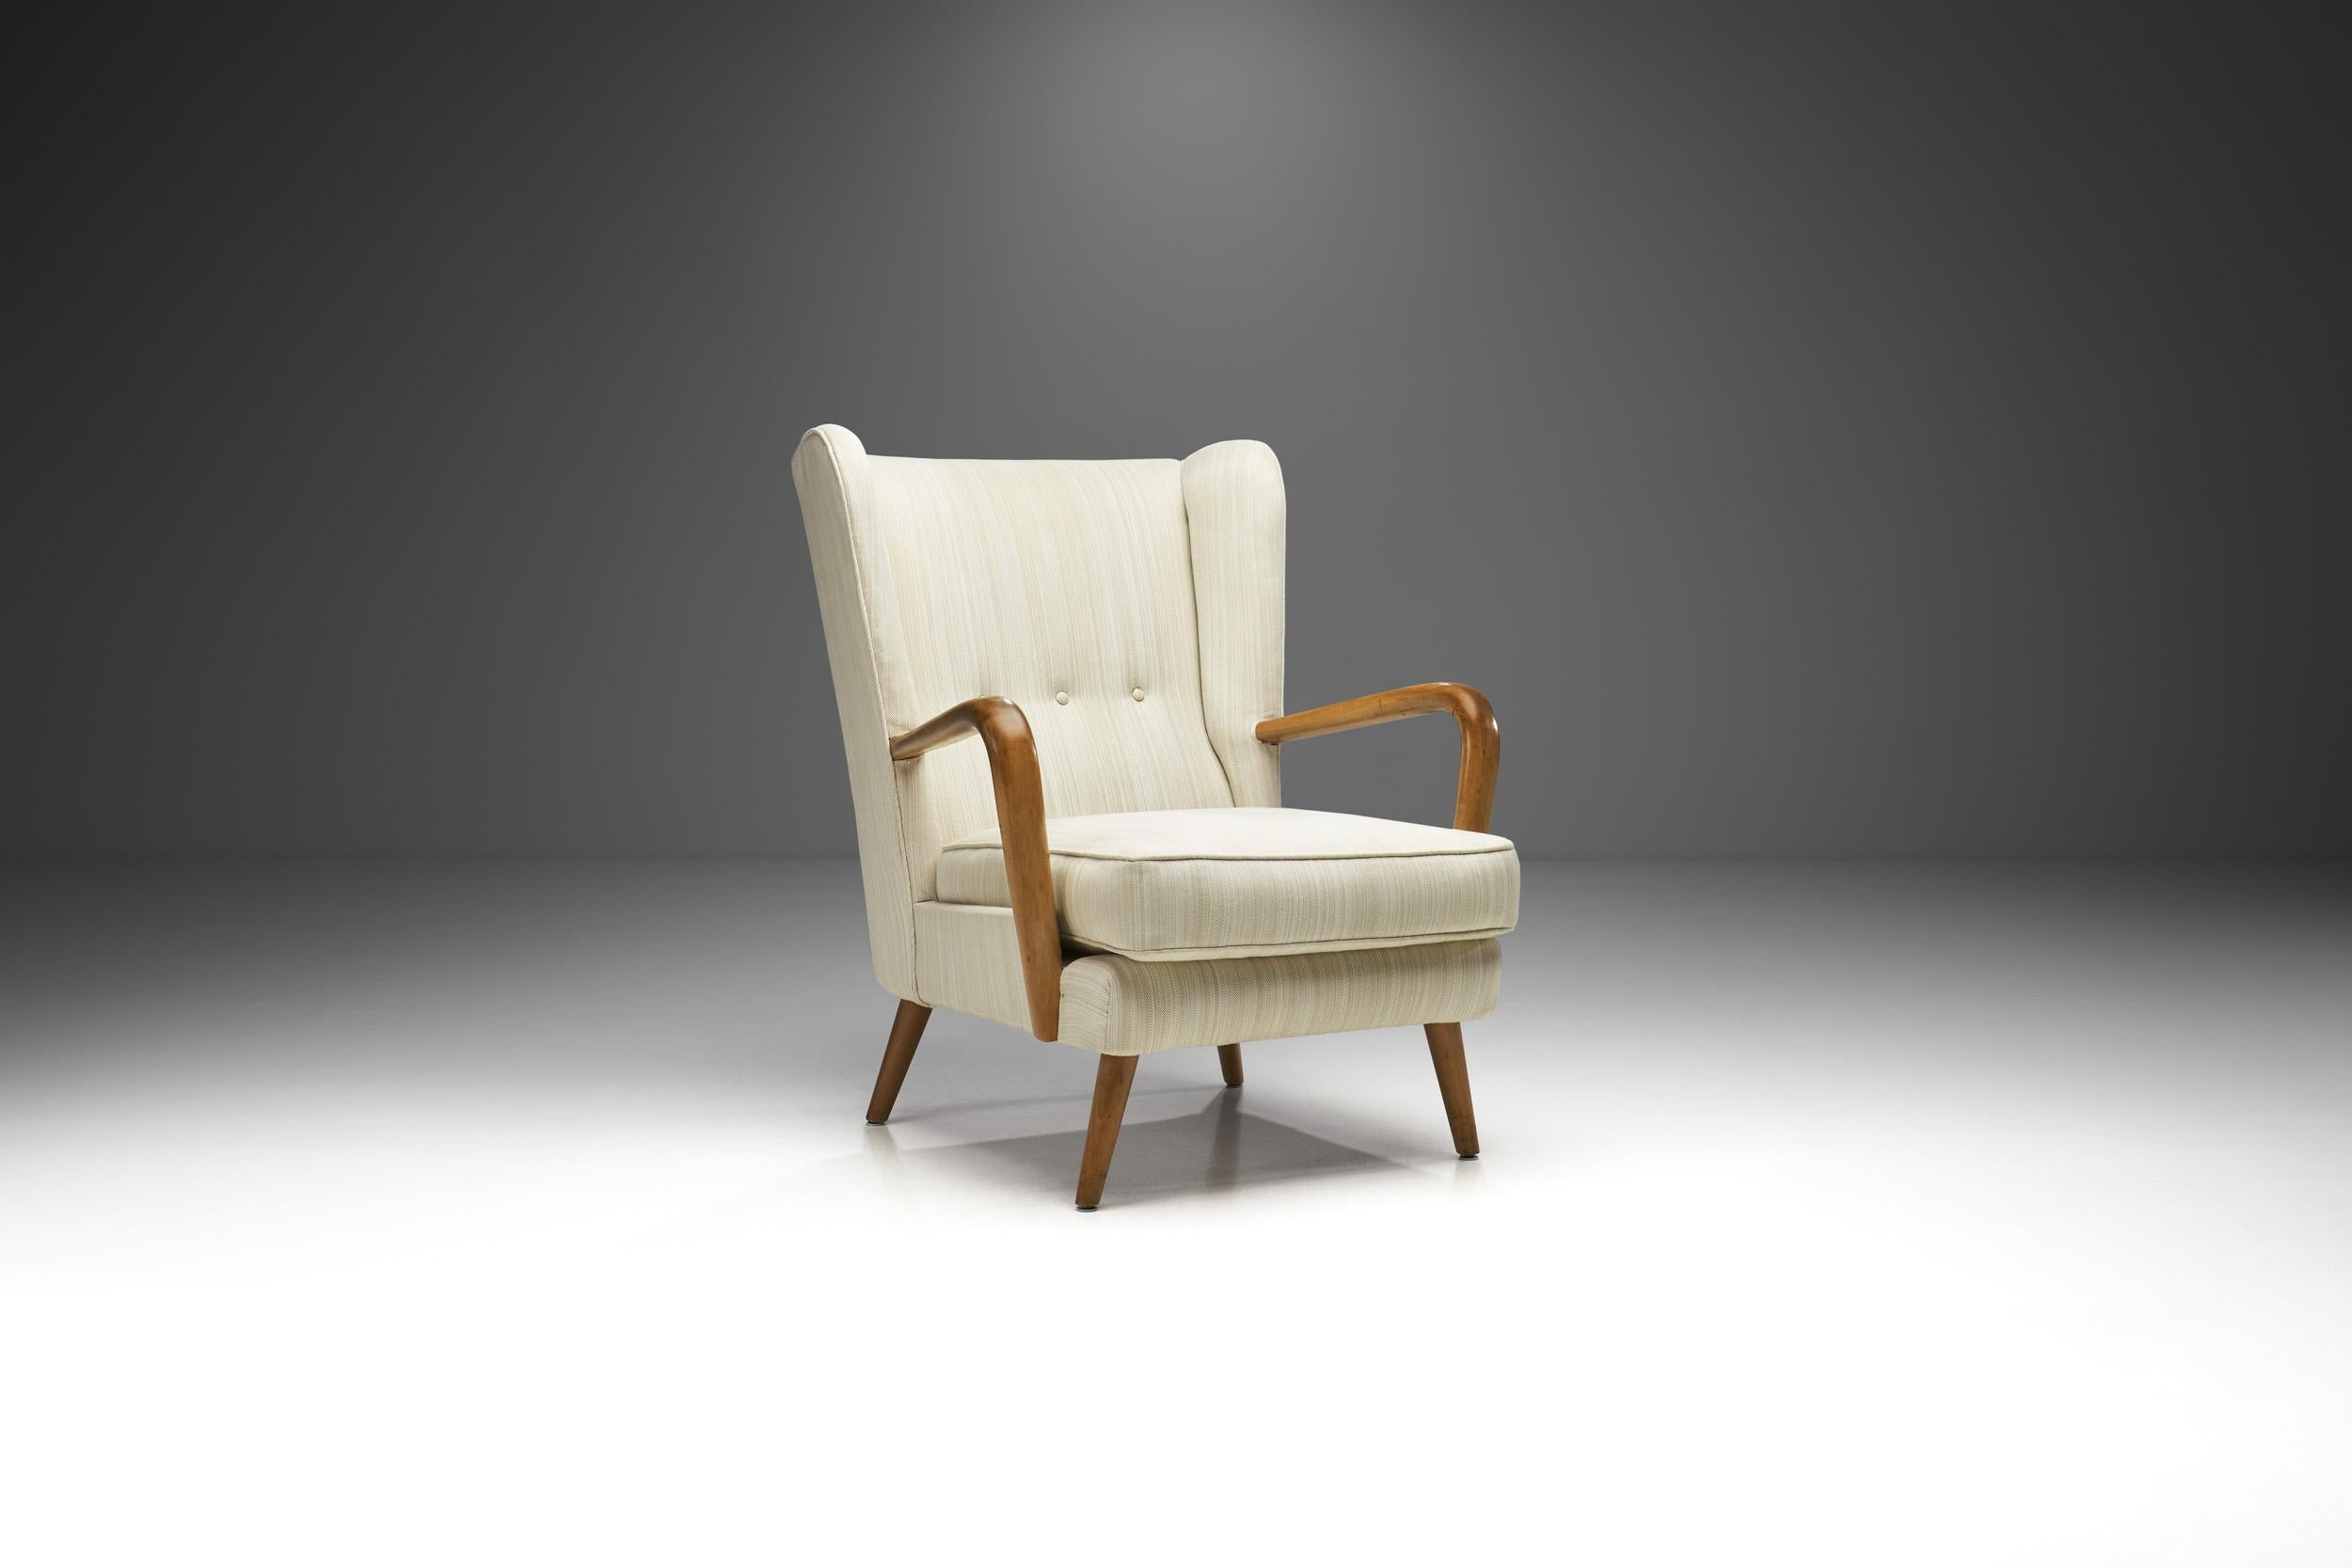 This Howard Keith “Bambino” armchair is a piece of history of a company, HK Furniture, and mid-century English design. By absorbing creative influences from abroad, but formulating a distinctive home-grown approach, Howard Keith was among the